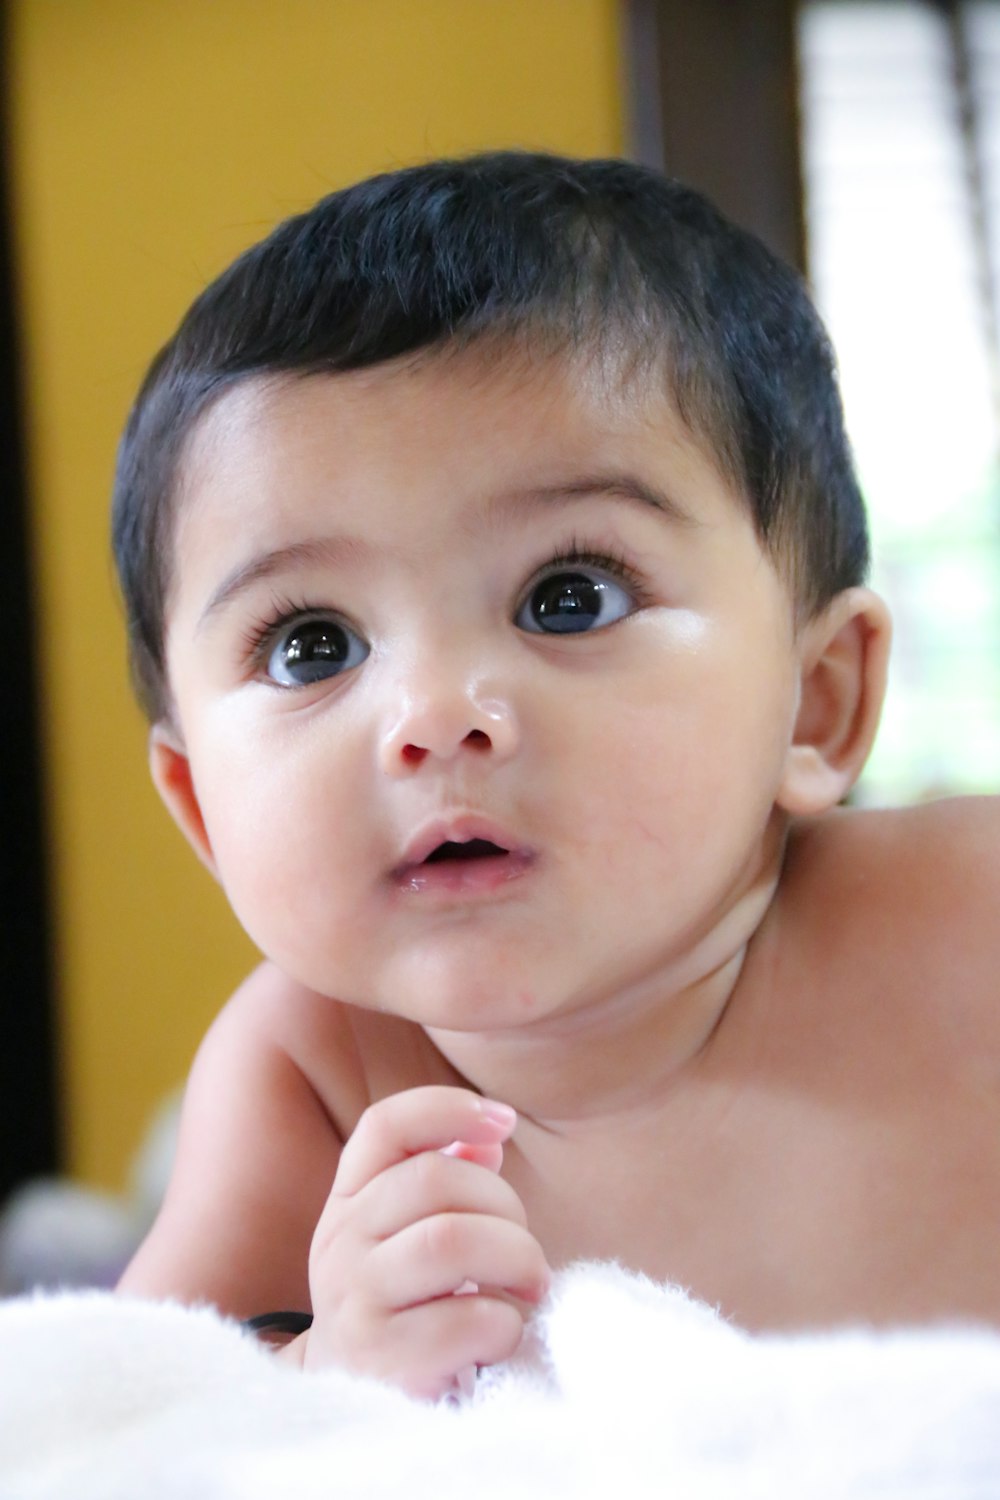 100+ Cute Baby Pictures [HD] | Download